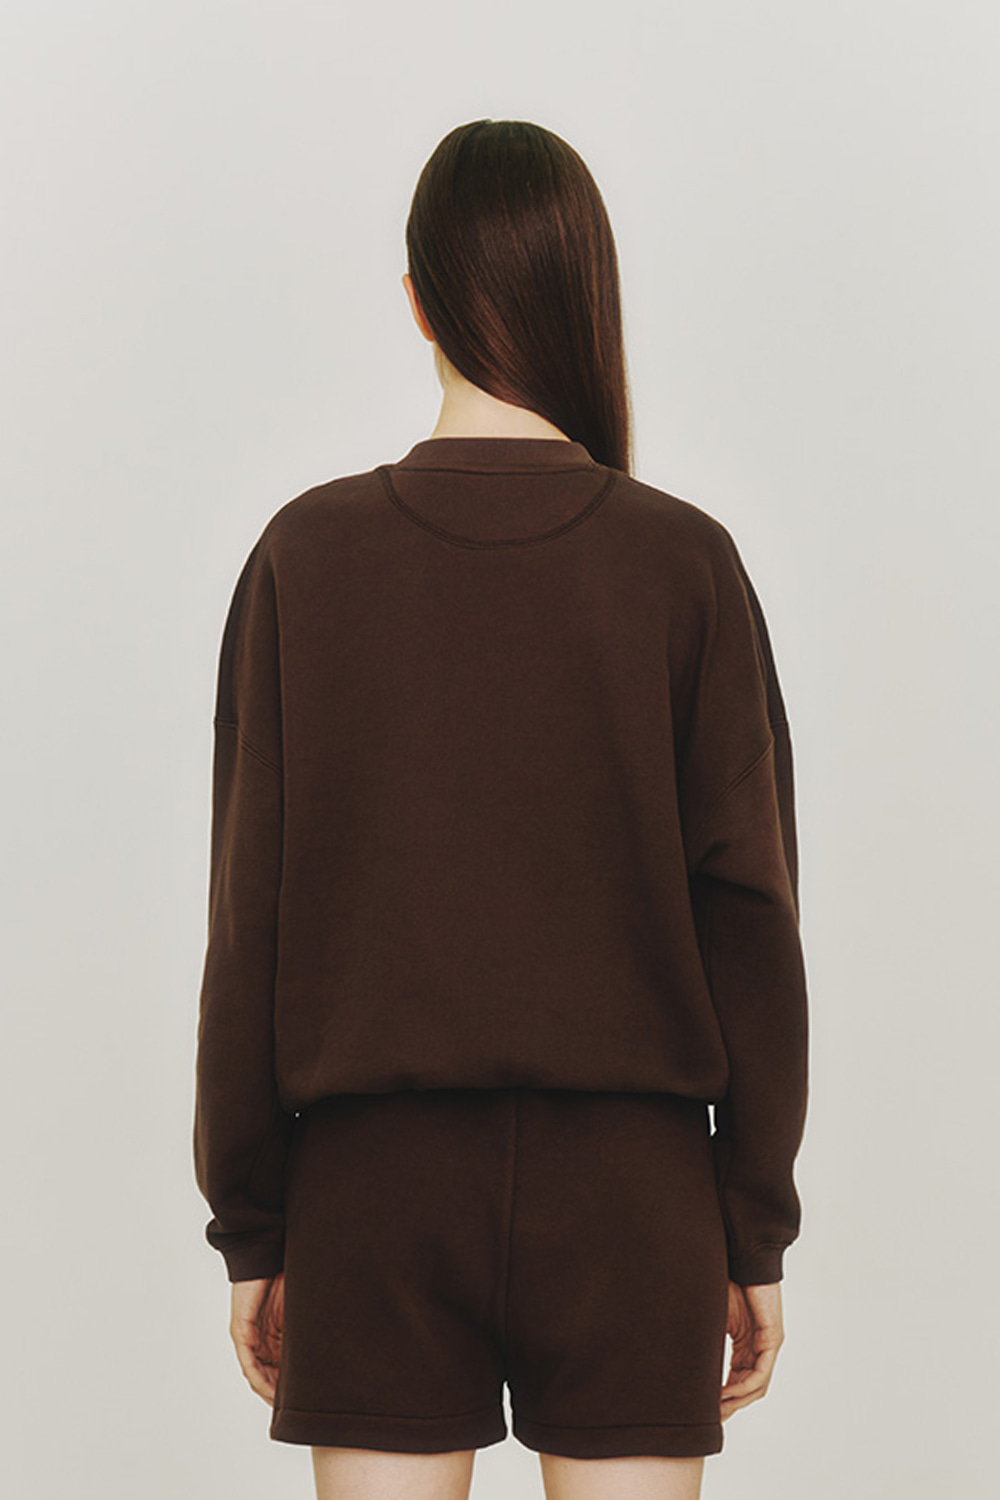 SWEAT SHIRT_TOASTED BROWN